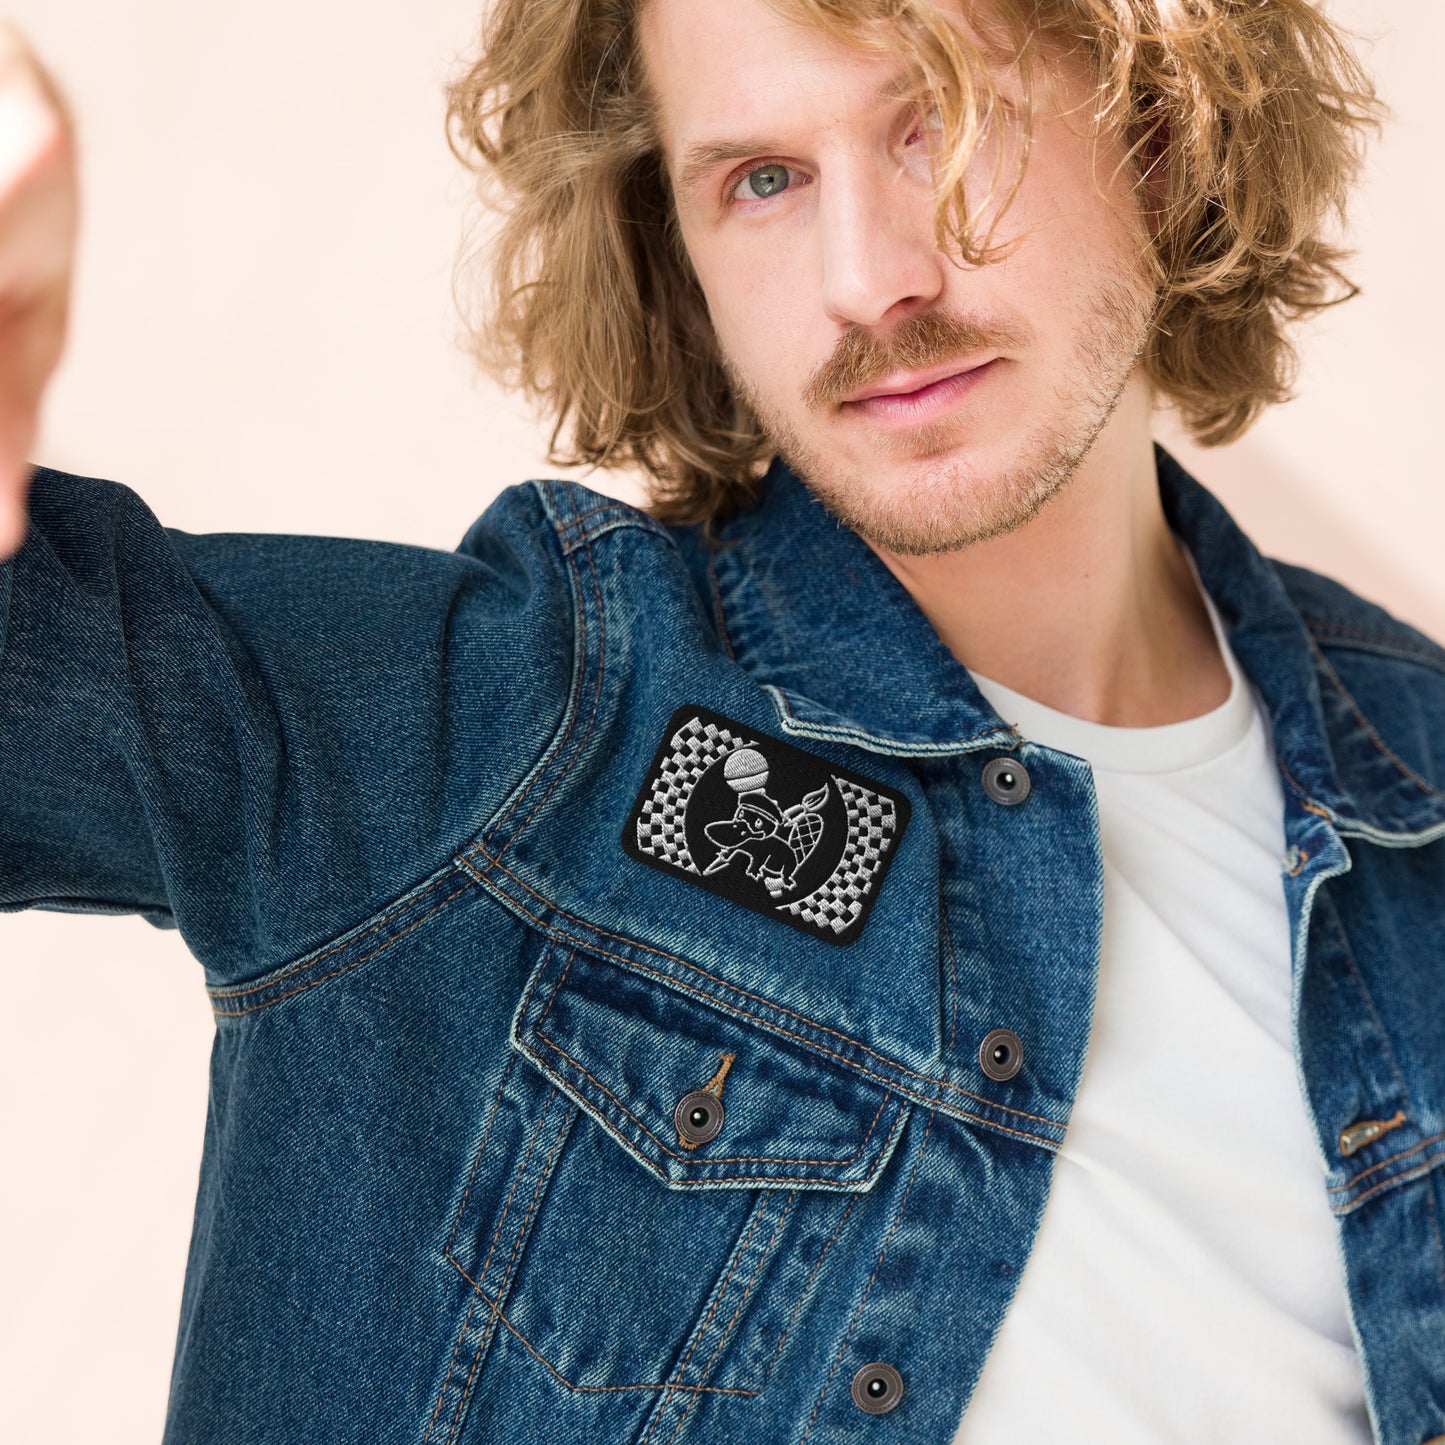 Rock Out With Jdubs Embroidered patches